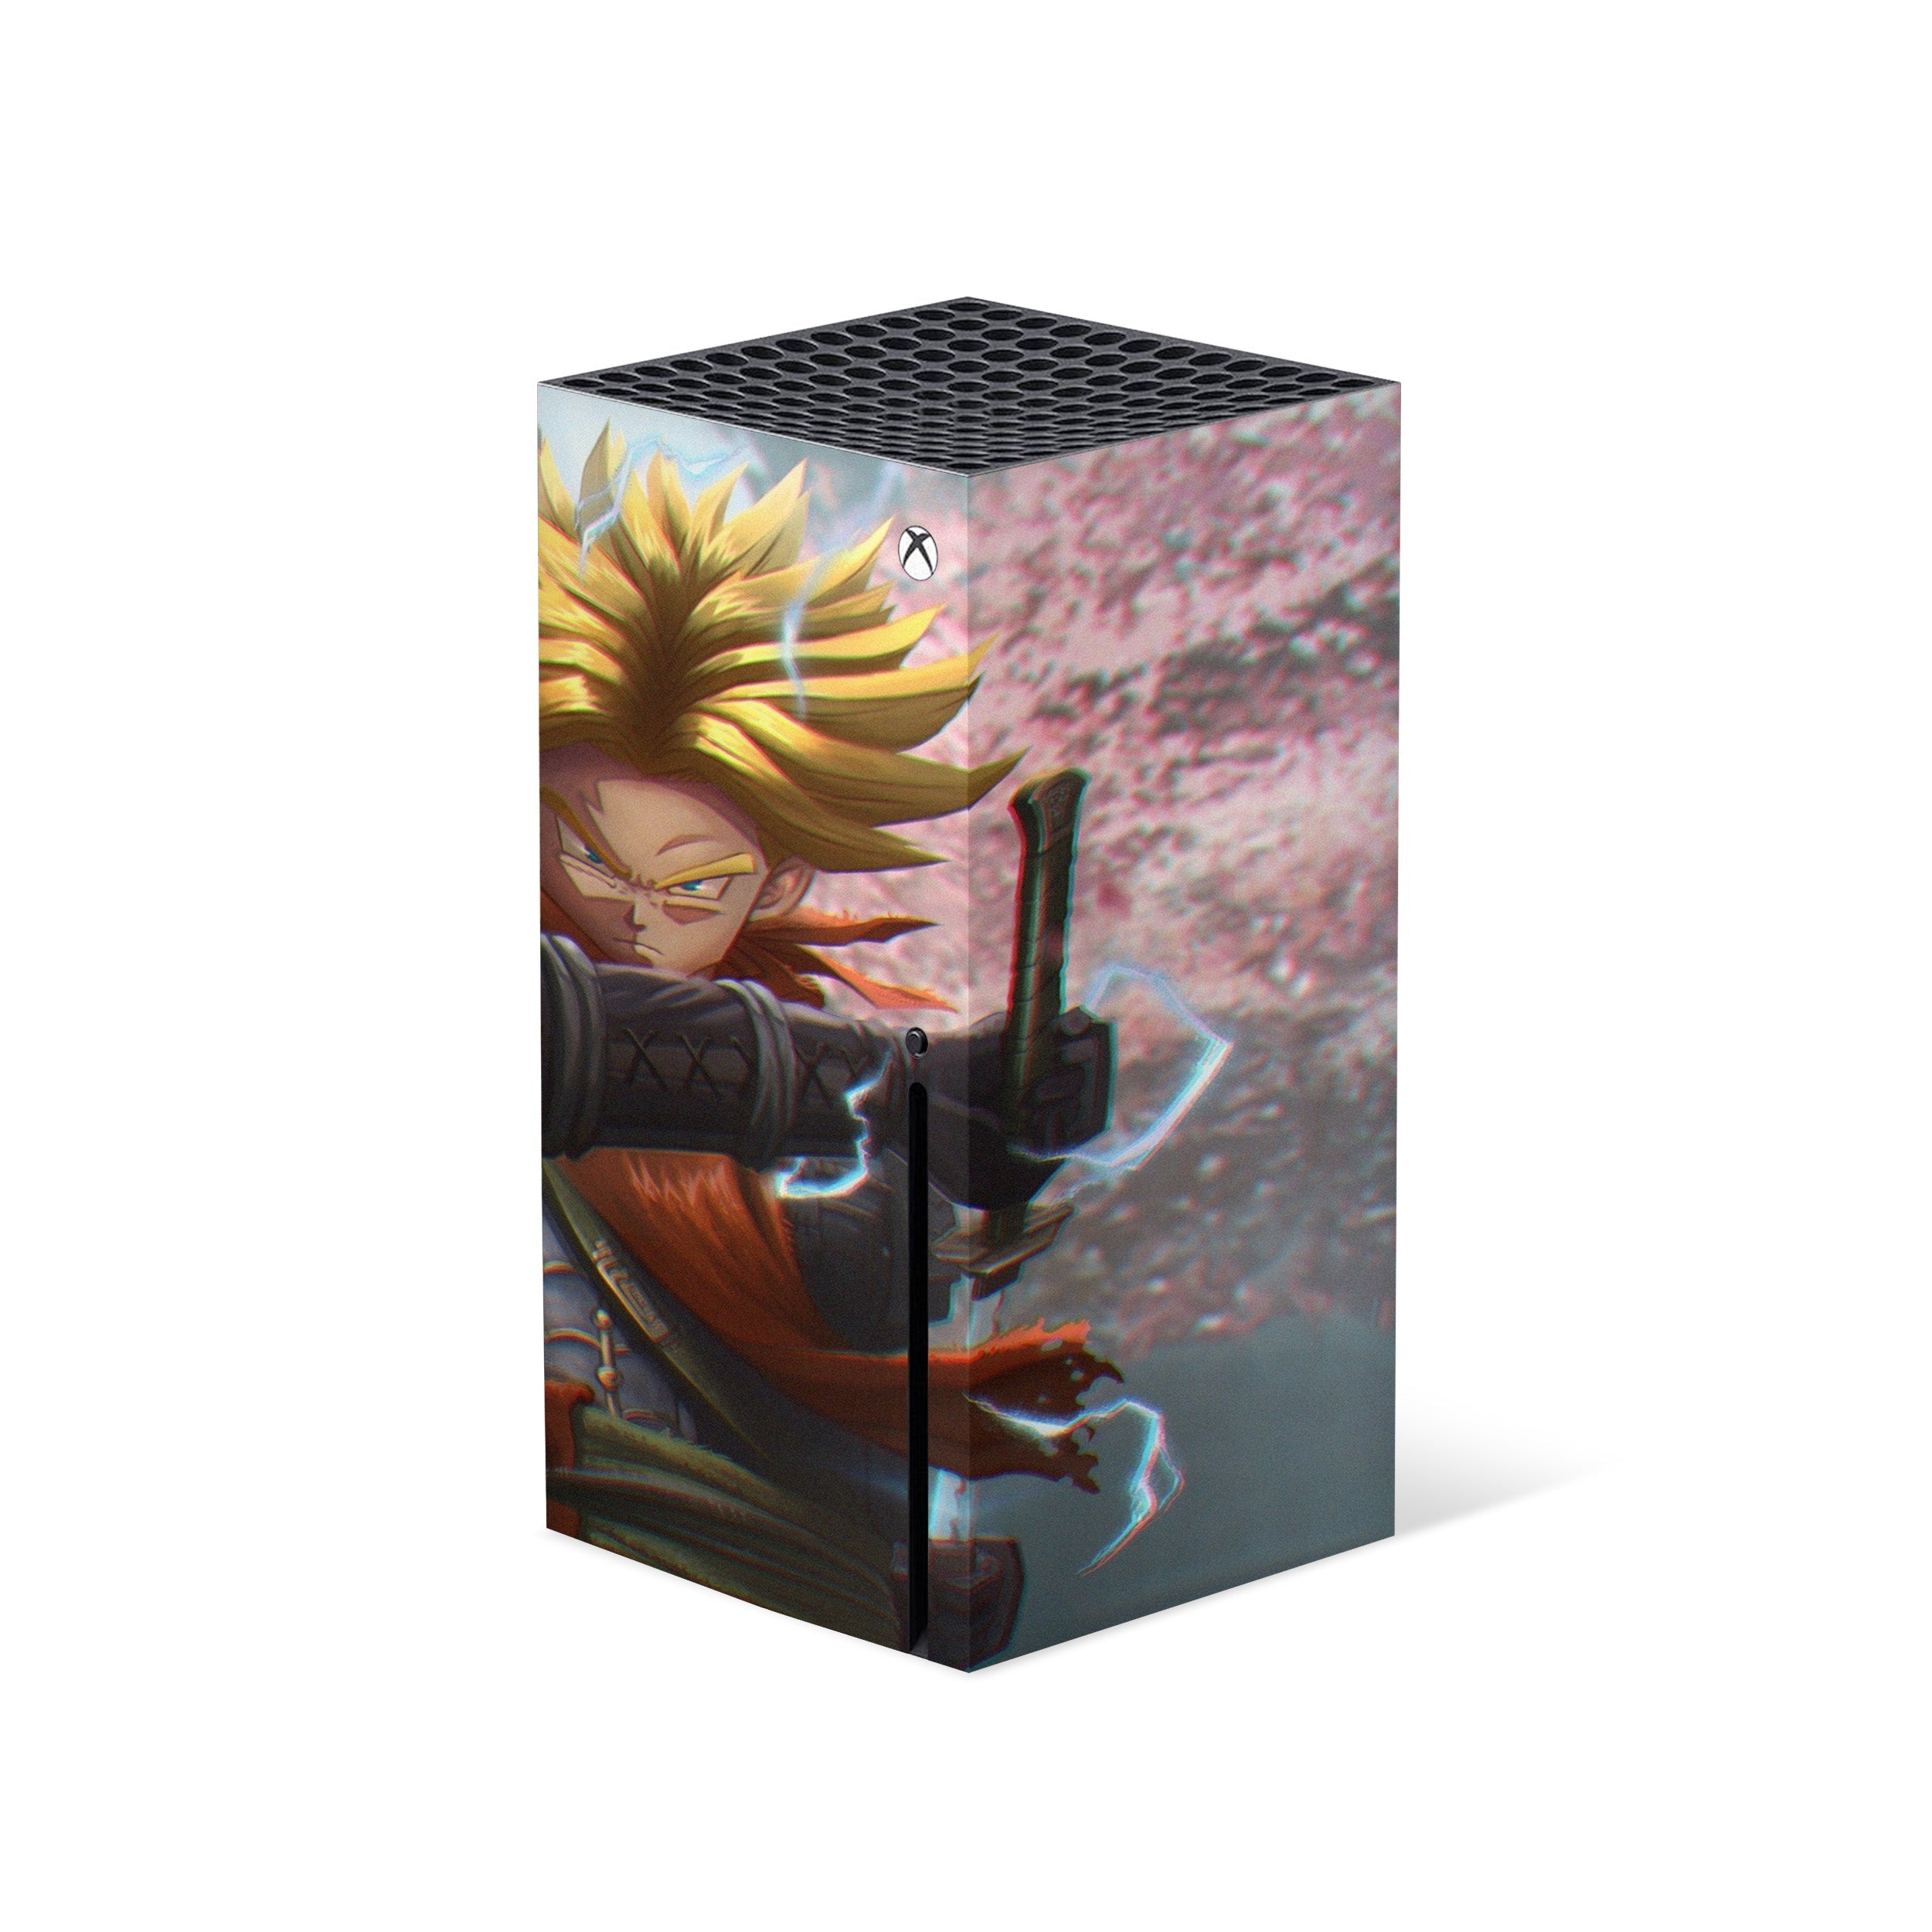 A video game skin featuring a Dragon Ball Super Trunks design for the Xbox Series X.